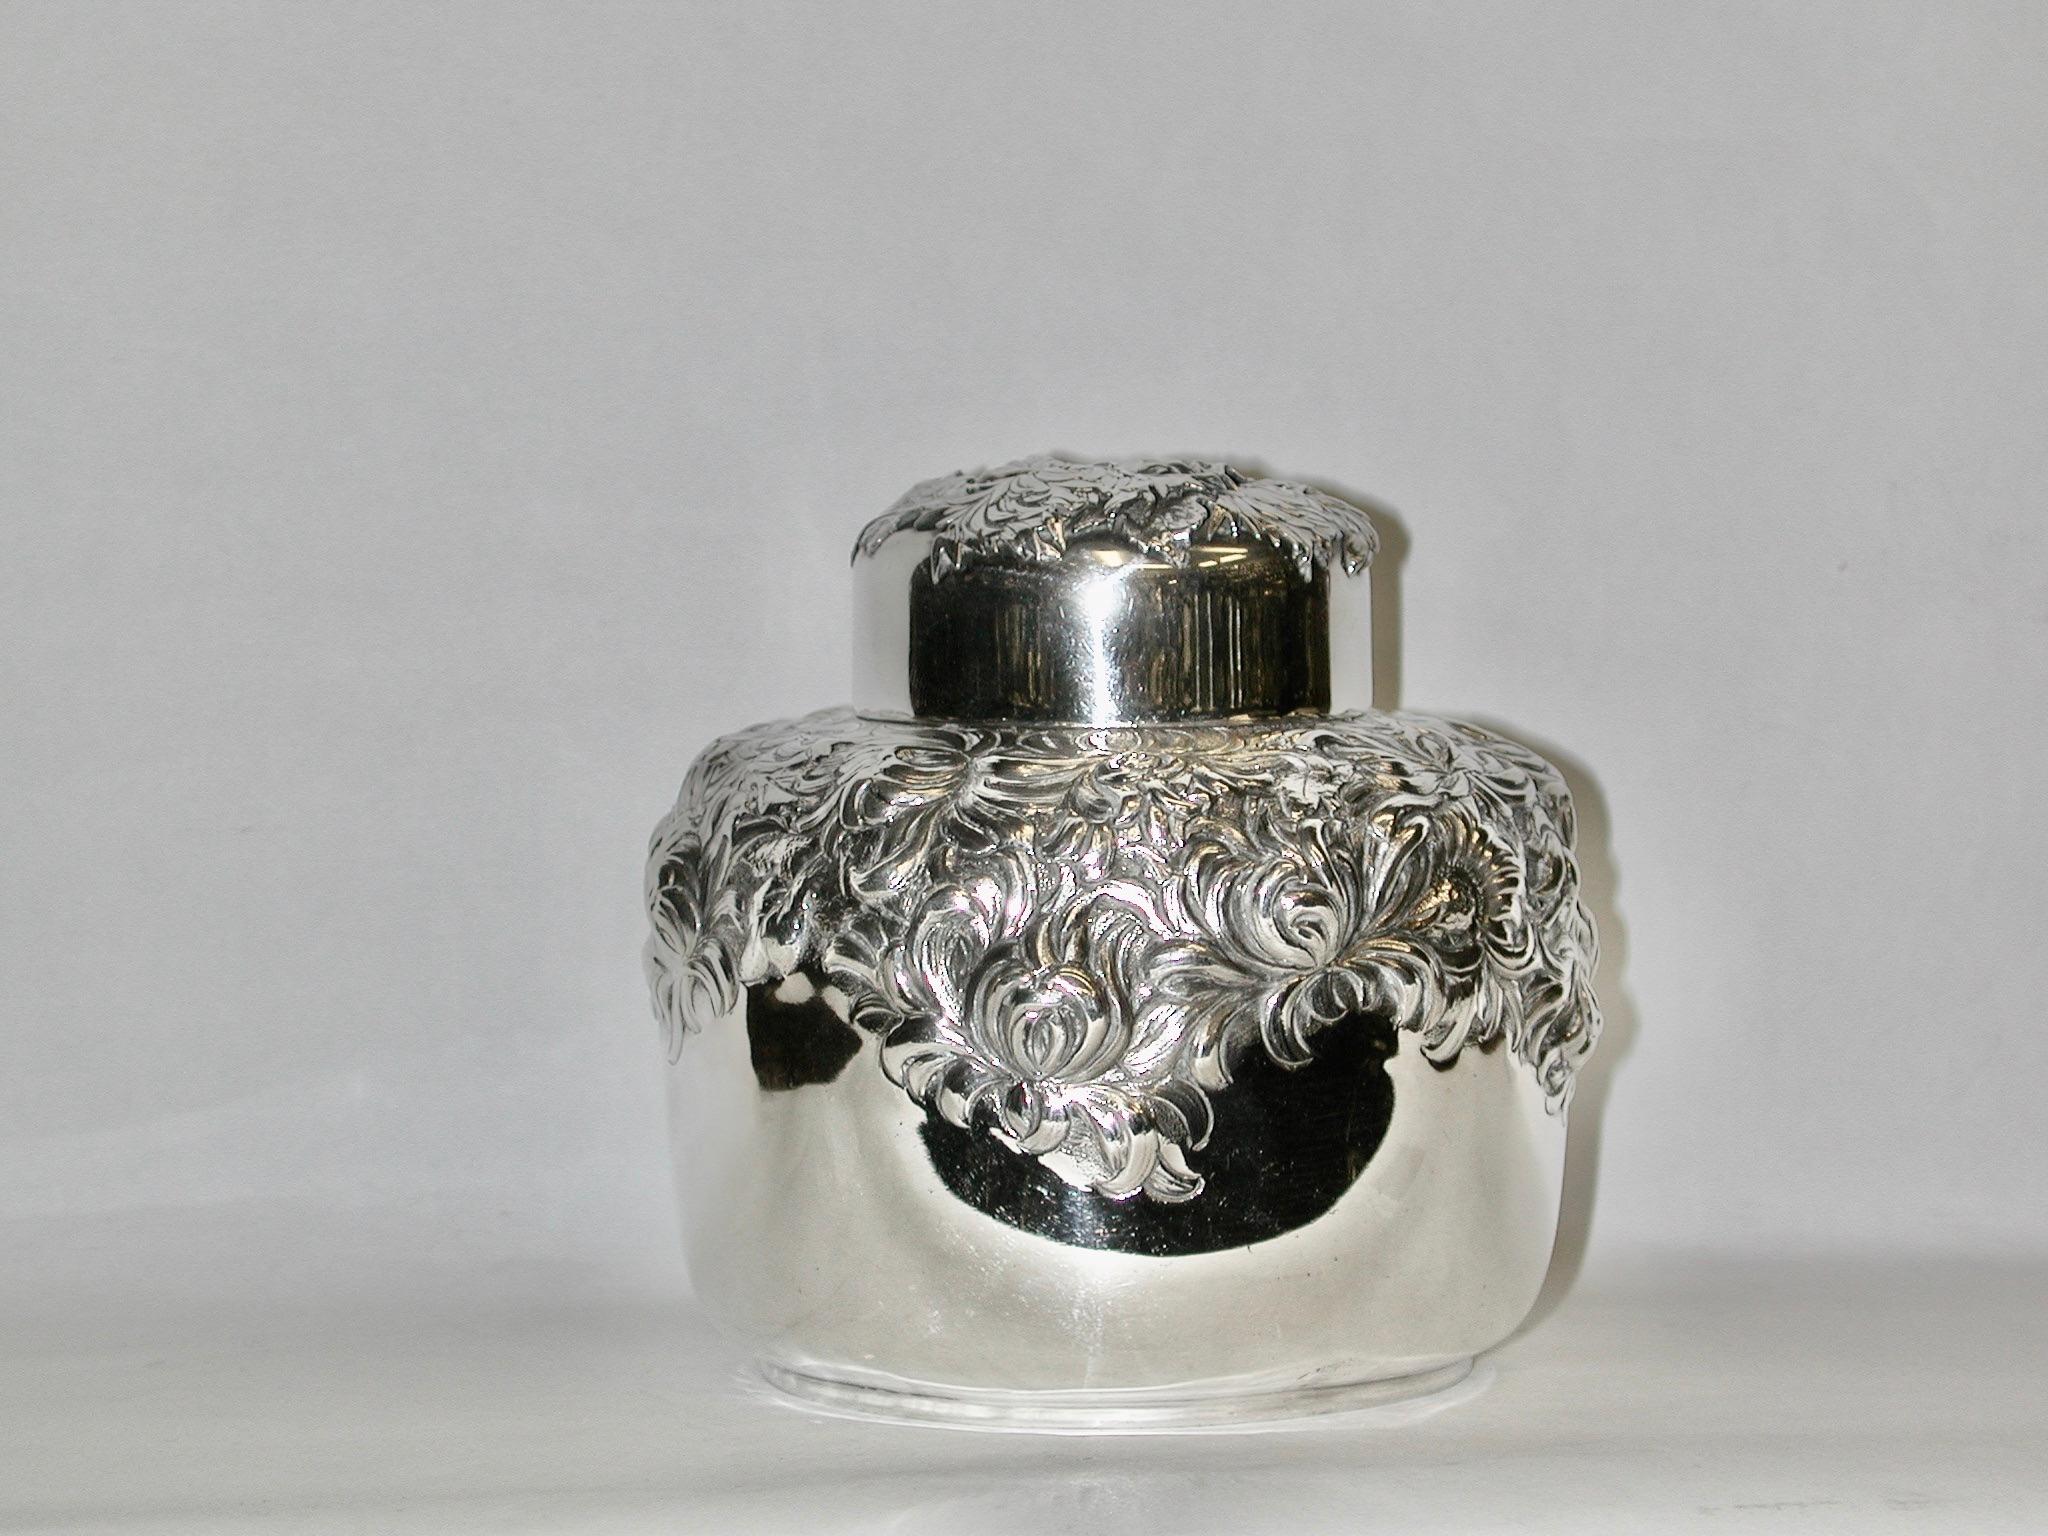 Aesthetic Japonesque sterling silver chrysanthemum tea caddy, Circa 1890, New York
Made by George W Sheibler in a heavy gauge of sterling silver.
Round with gently tapering sides and short neck with snug-fitting cover. 
Chased and applied